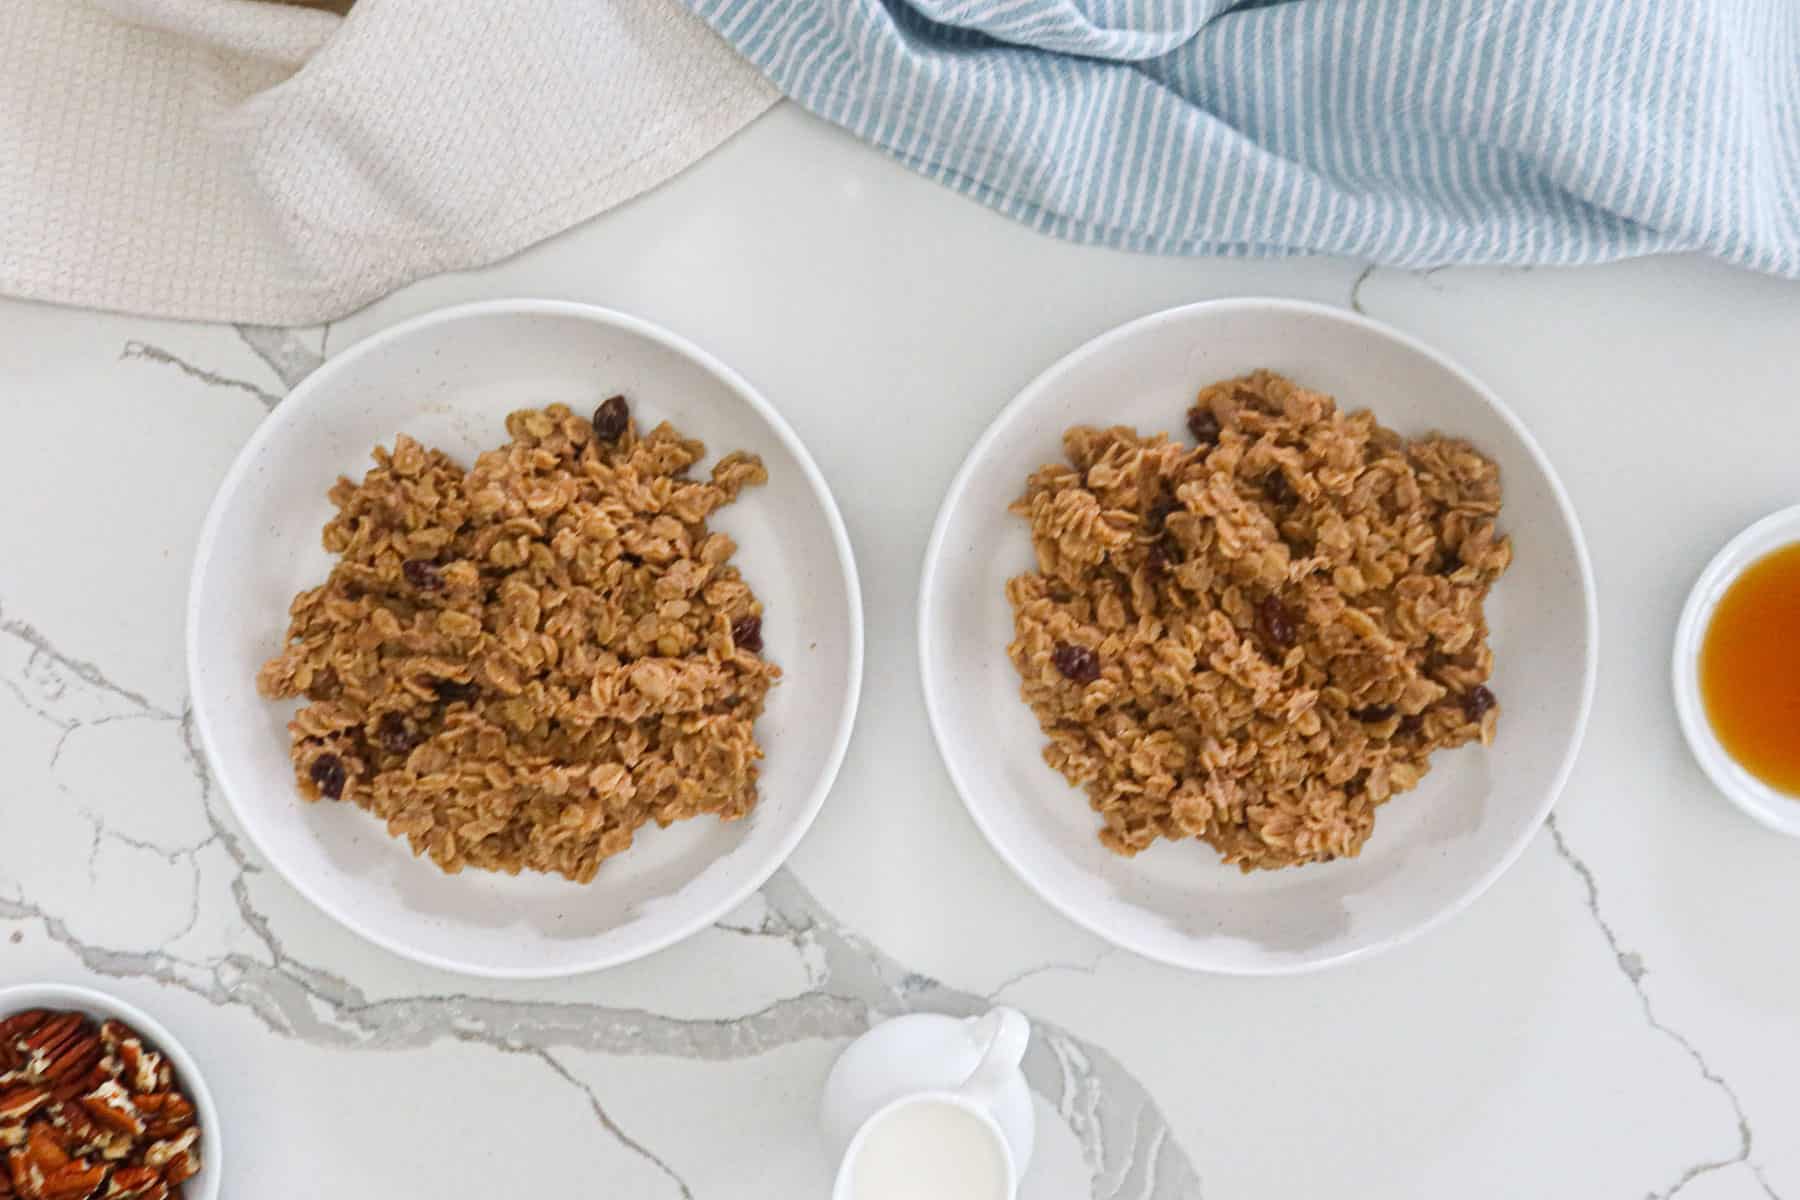 Cinnamon oatmeal divided into two white serving bowls.